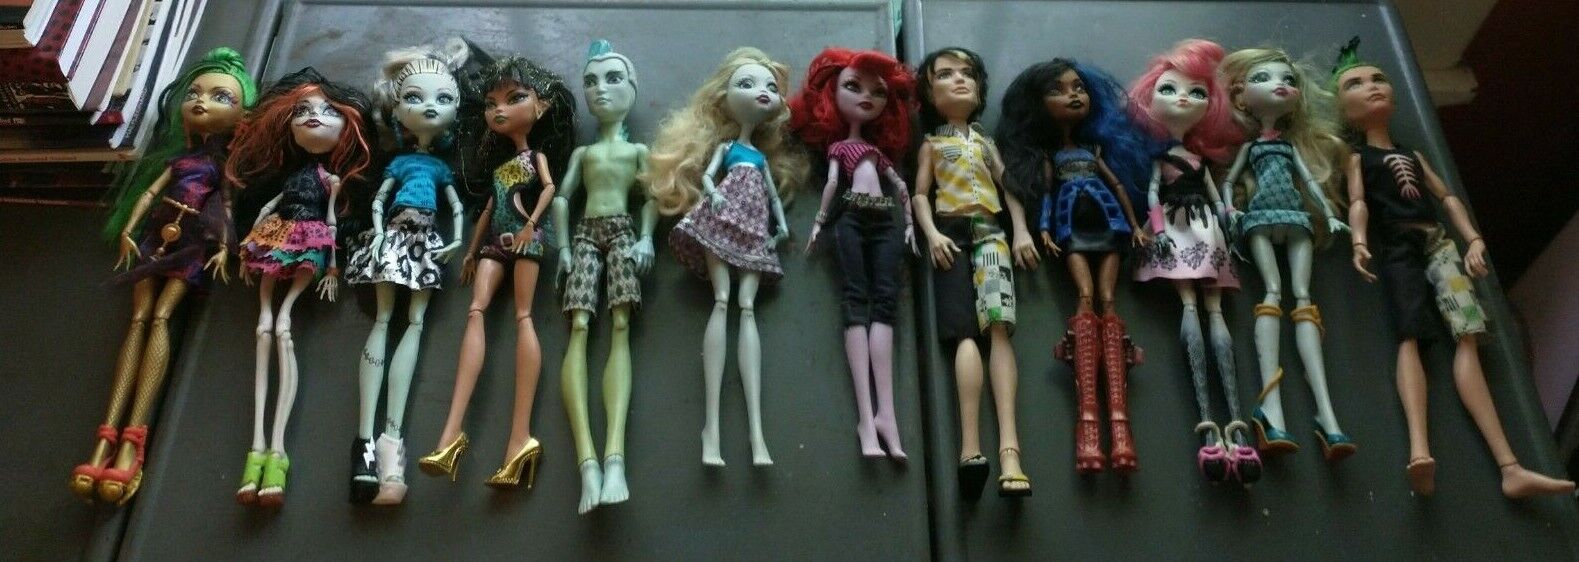 HUGE PRE-OWNED MONSTER HIGH Lot With 12 Dolls, Clothes, Shoes & Accessories Без бренда